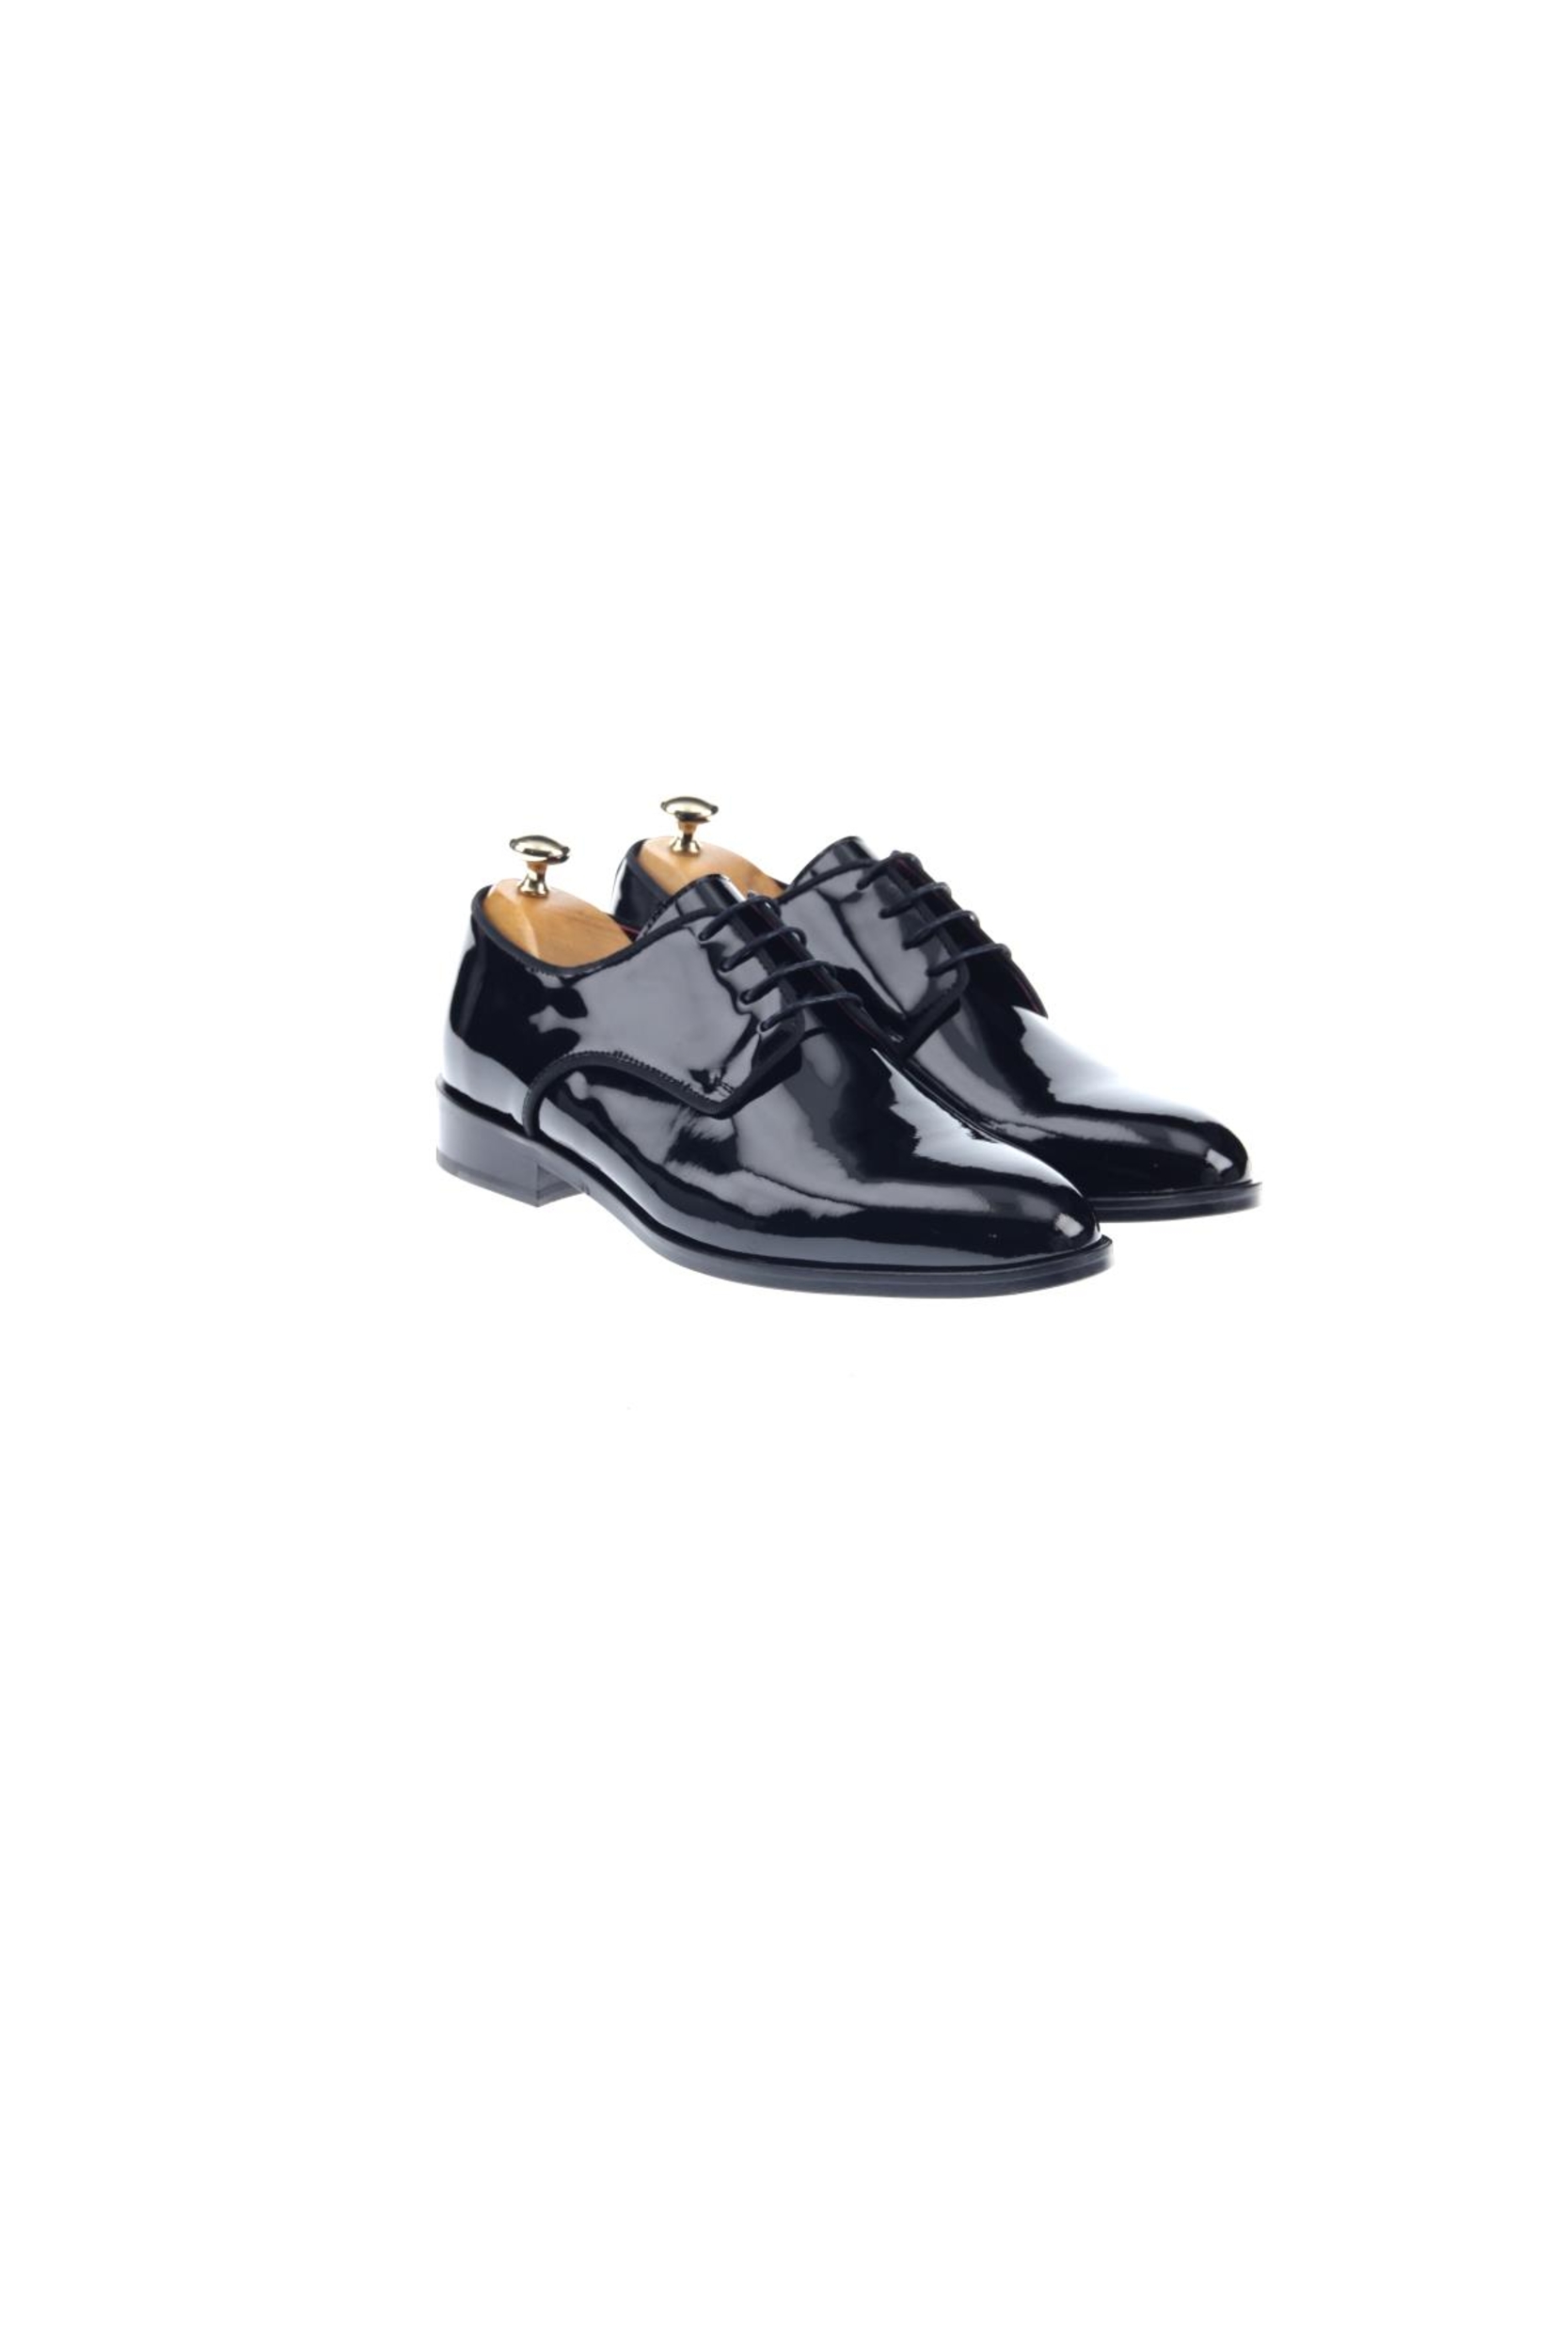 Picture of Giovane Gentile Tuxedo Shoes